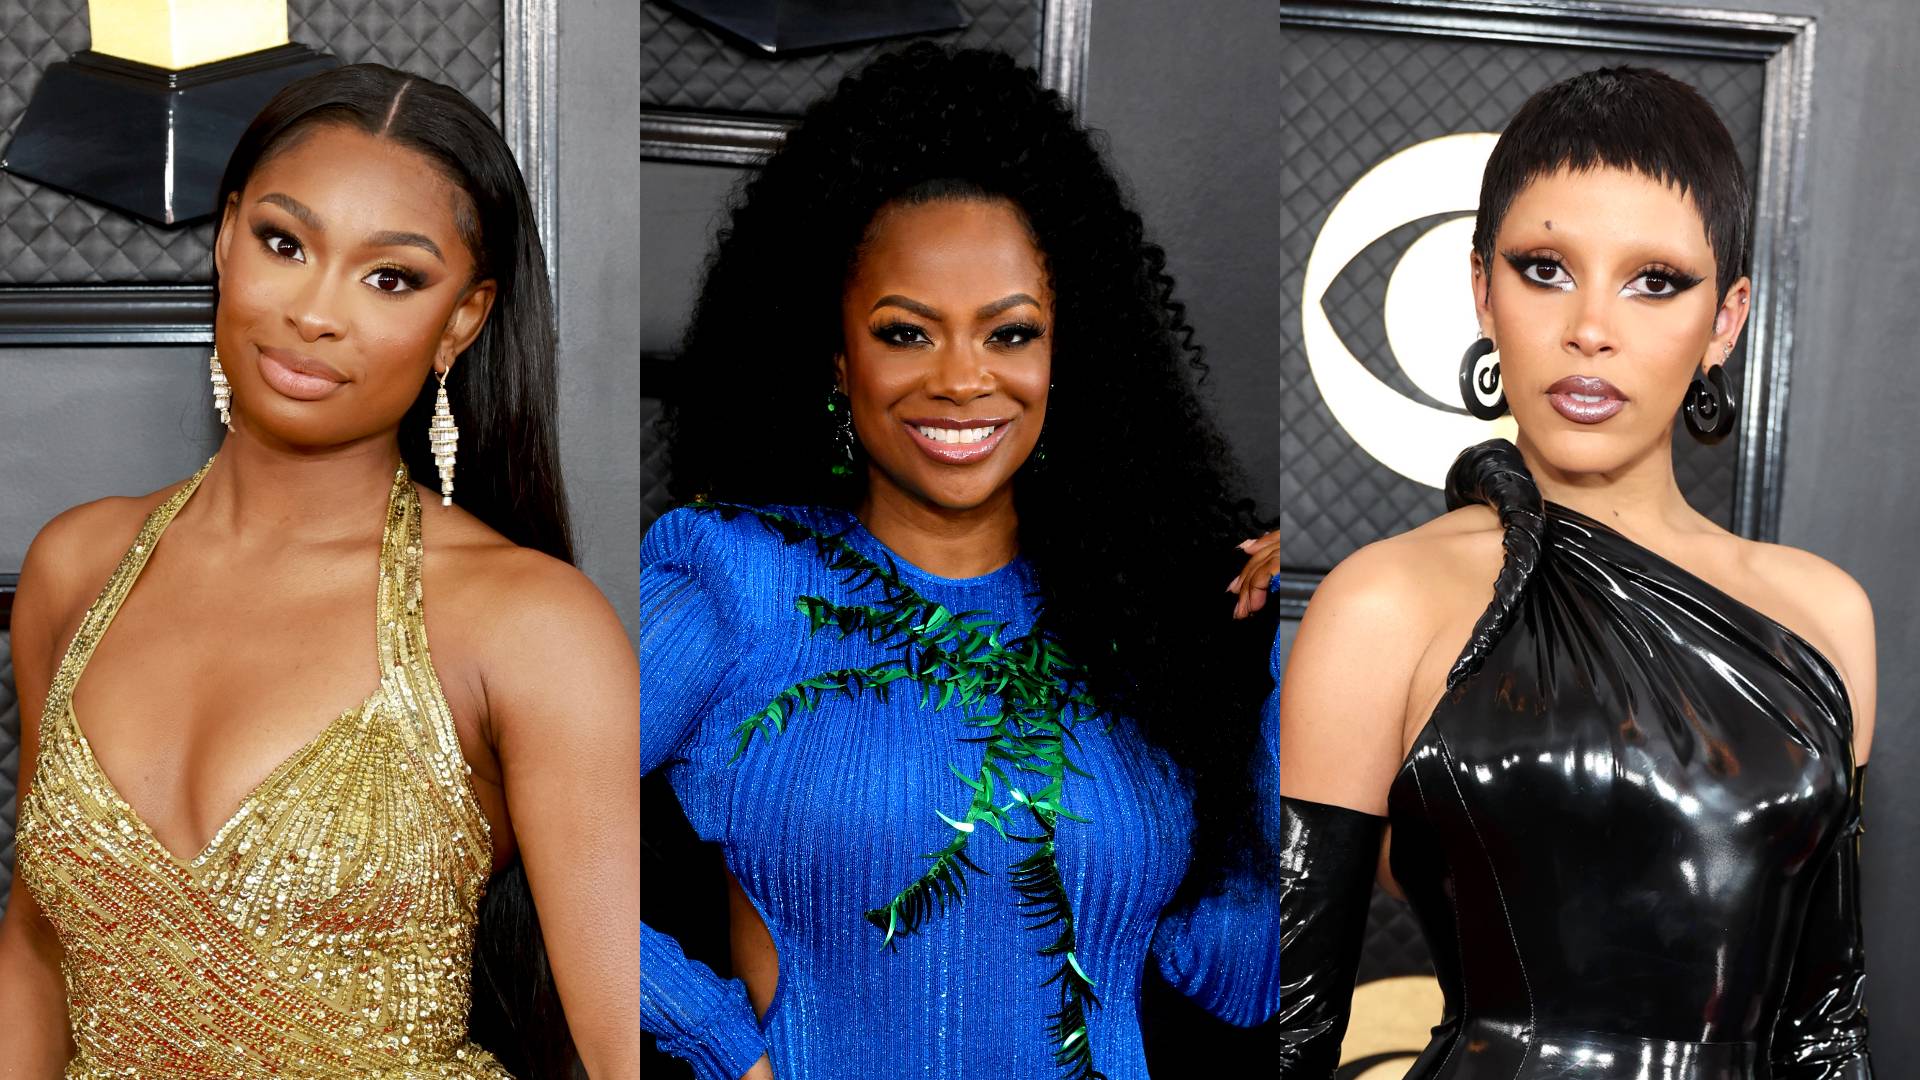 65th Annual Grammy Awards: Fabulous Hair And Makeup On The Red Carpet!